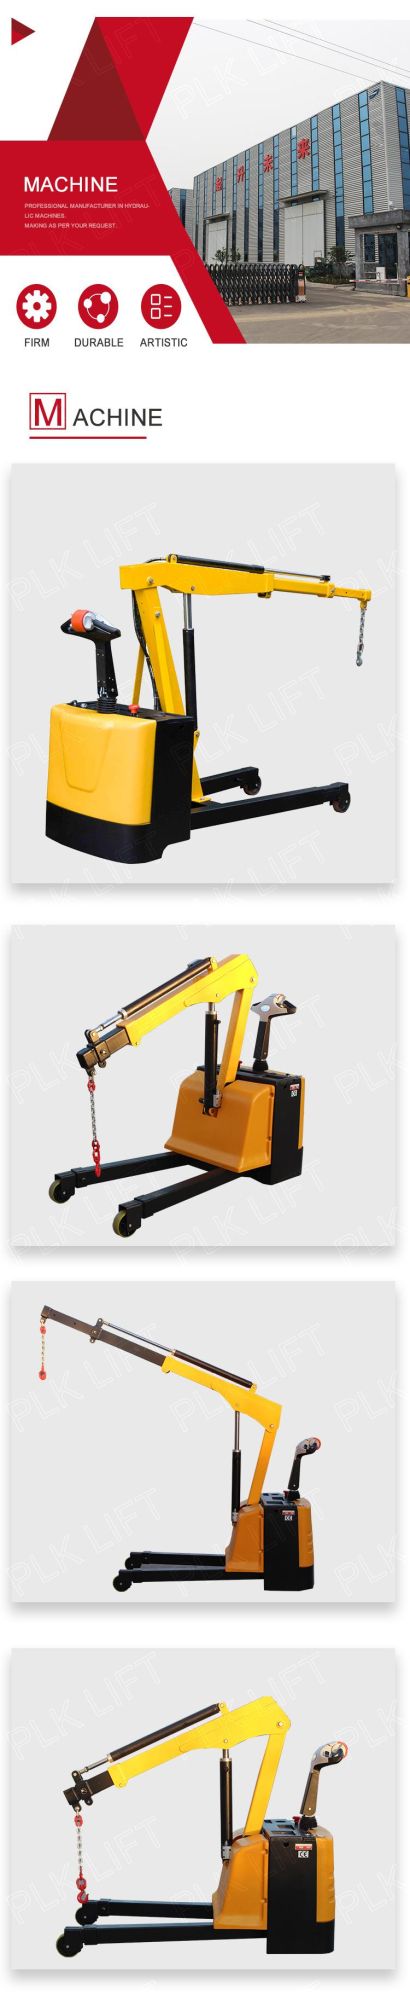 Electric Automatic Small Lifting Device Ce Certified